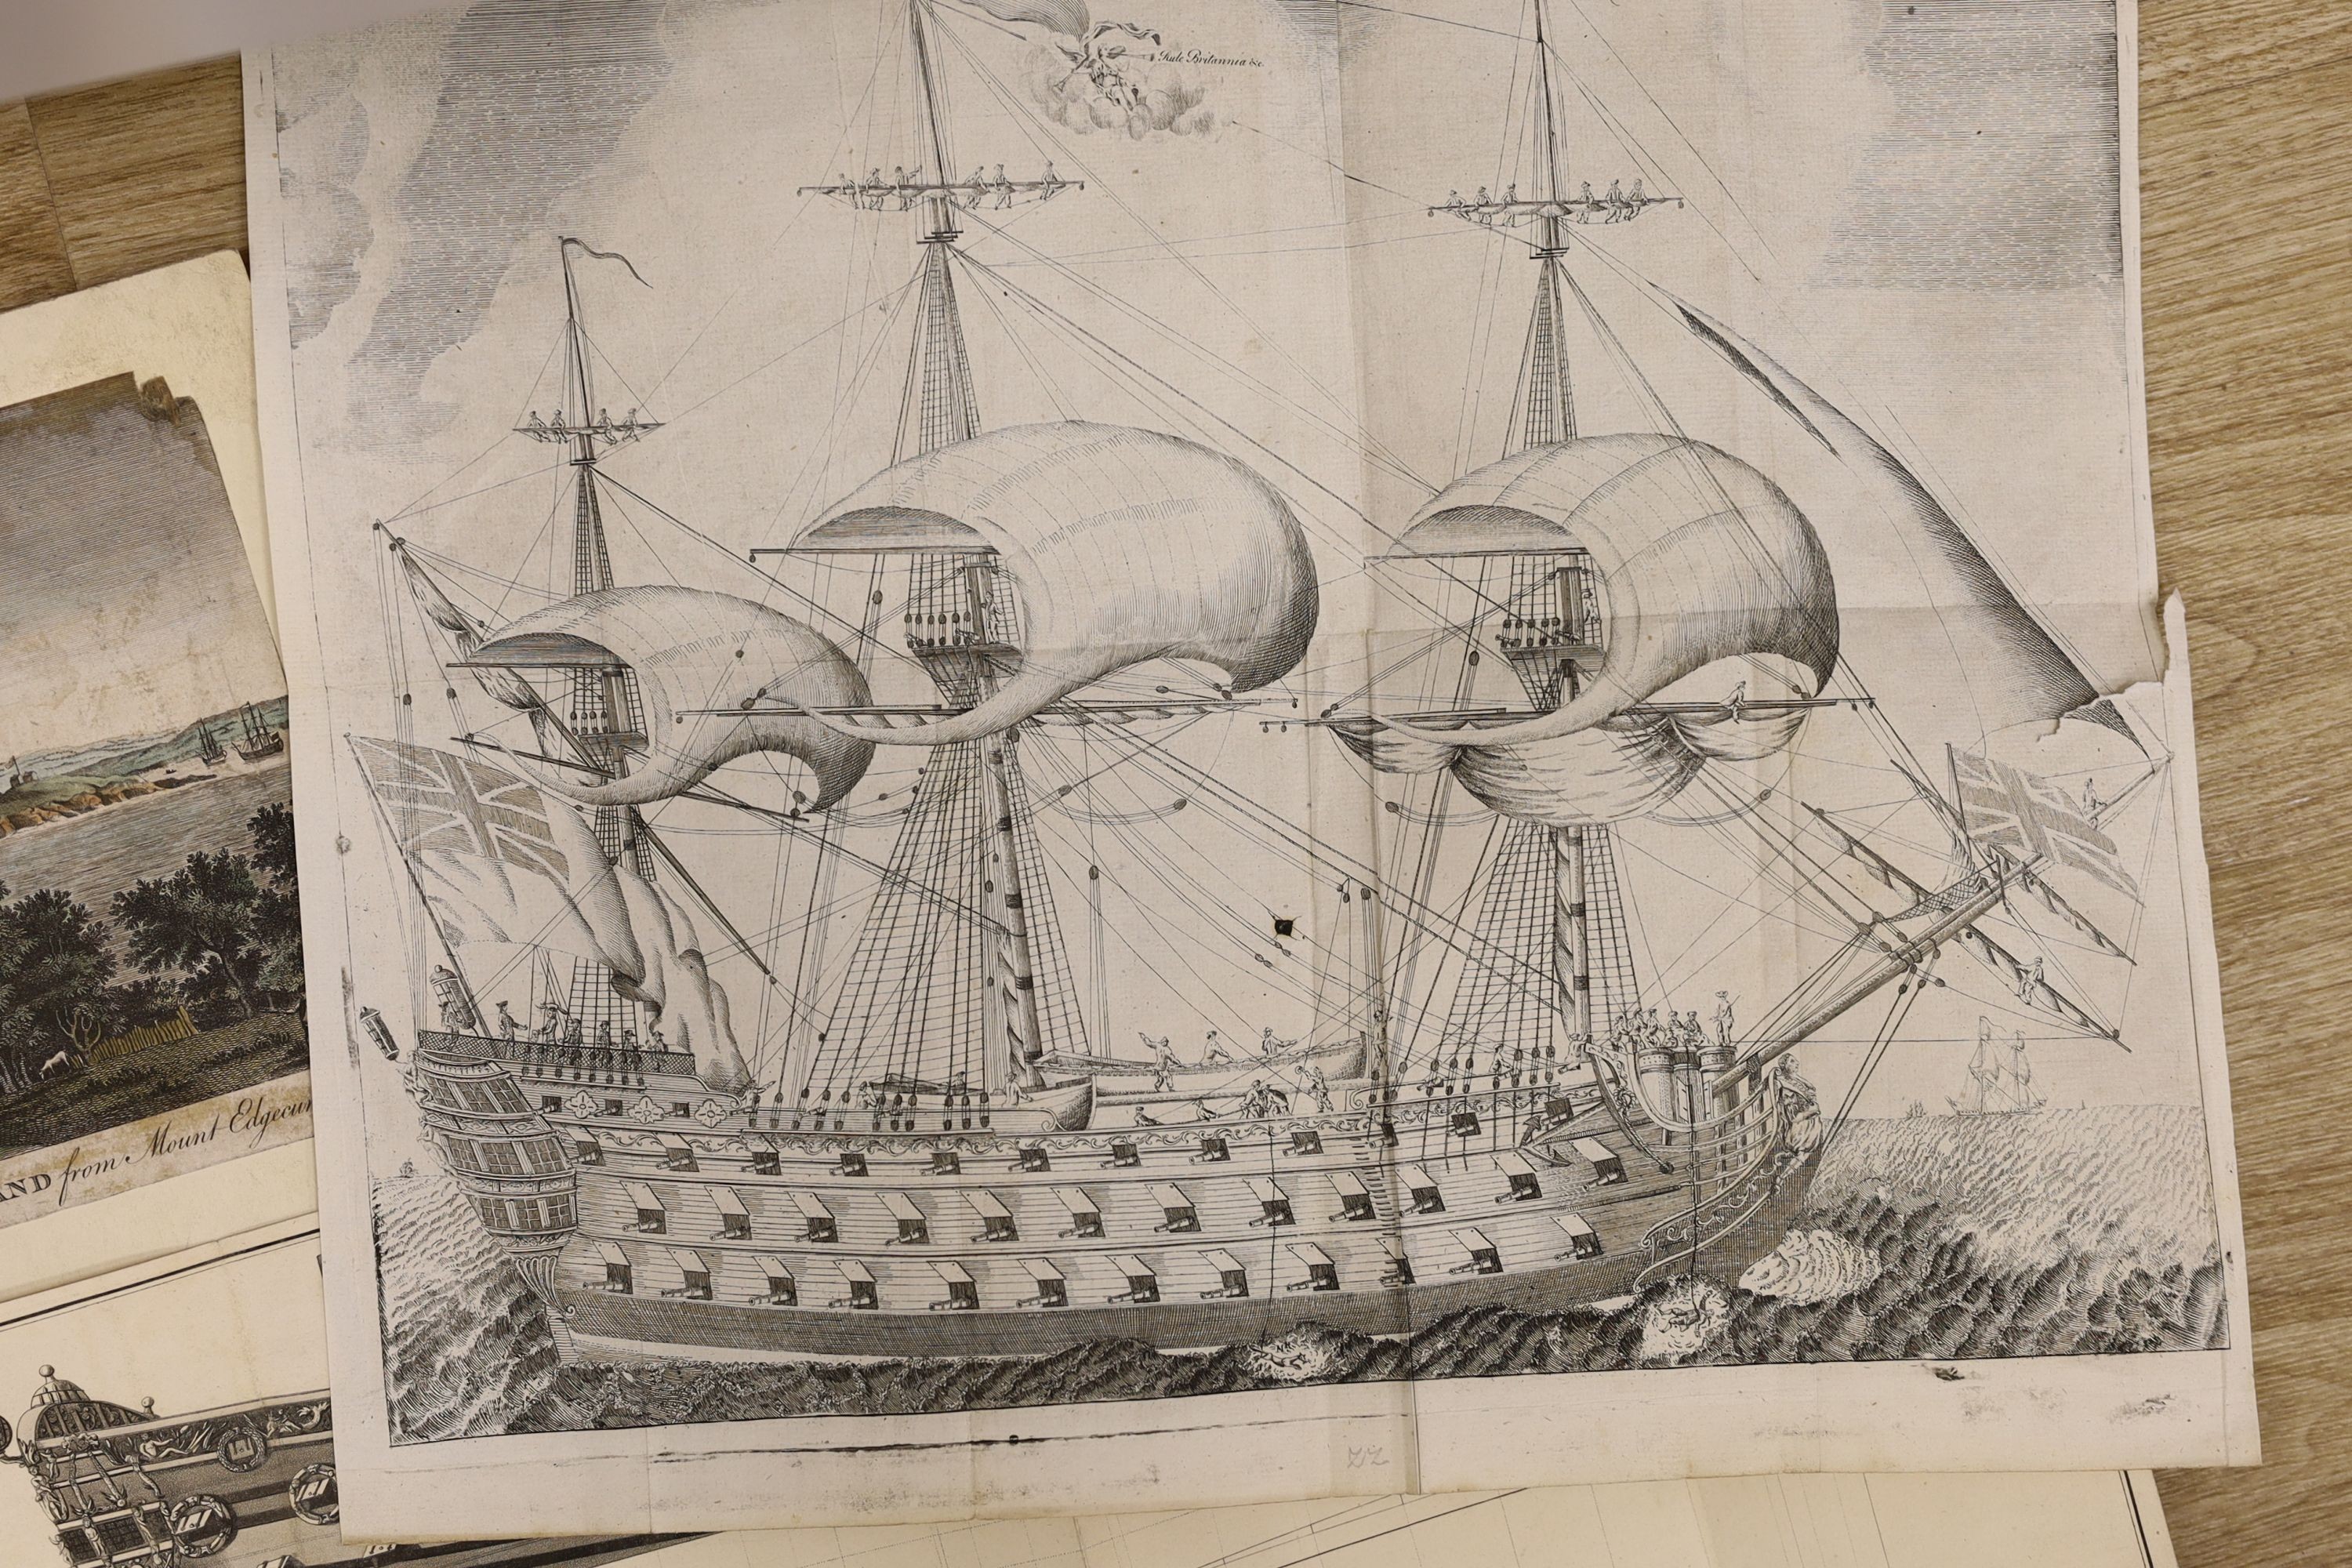 Baillie after Van de Velde, engraving, warships at sea, 1761, 18 x 31cm. an engraving of a warship inscribed 'Rule Britannia', 38 x 44cm, a John Charnock engraving, 'The Captain A British Third Rate. 1678', 28 x 60cm. an